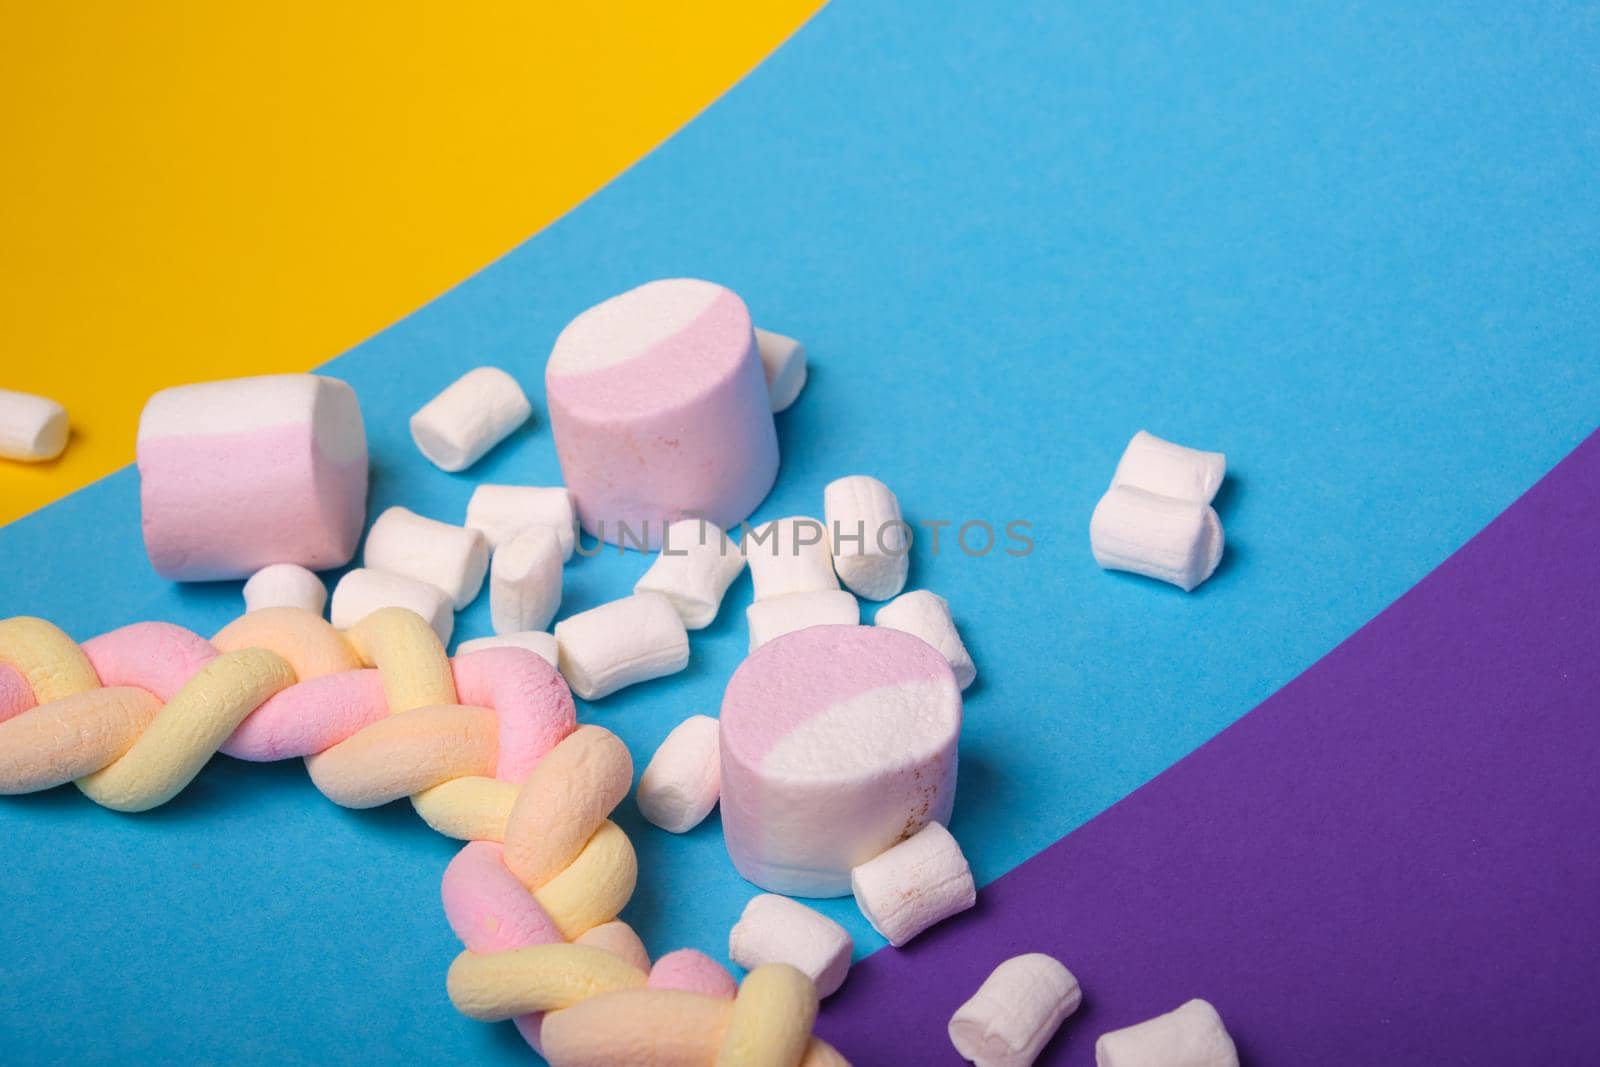 different types of marshmallows with different flavors on a bright colored background, long spaghetti-shaped marshmallows are braided in a pigtail by natashko